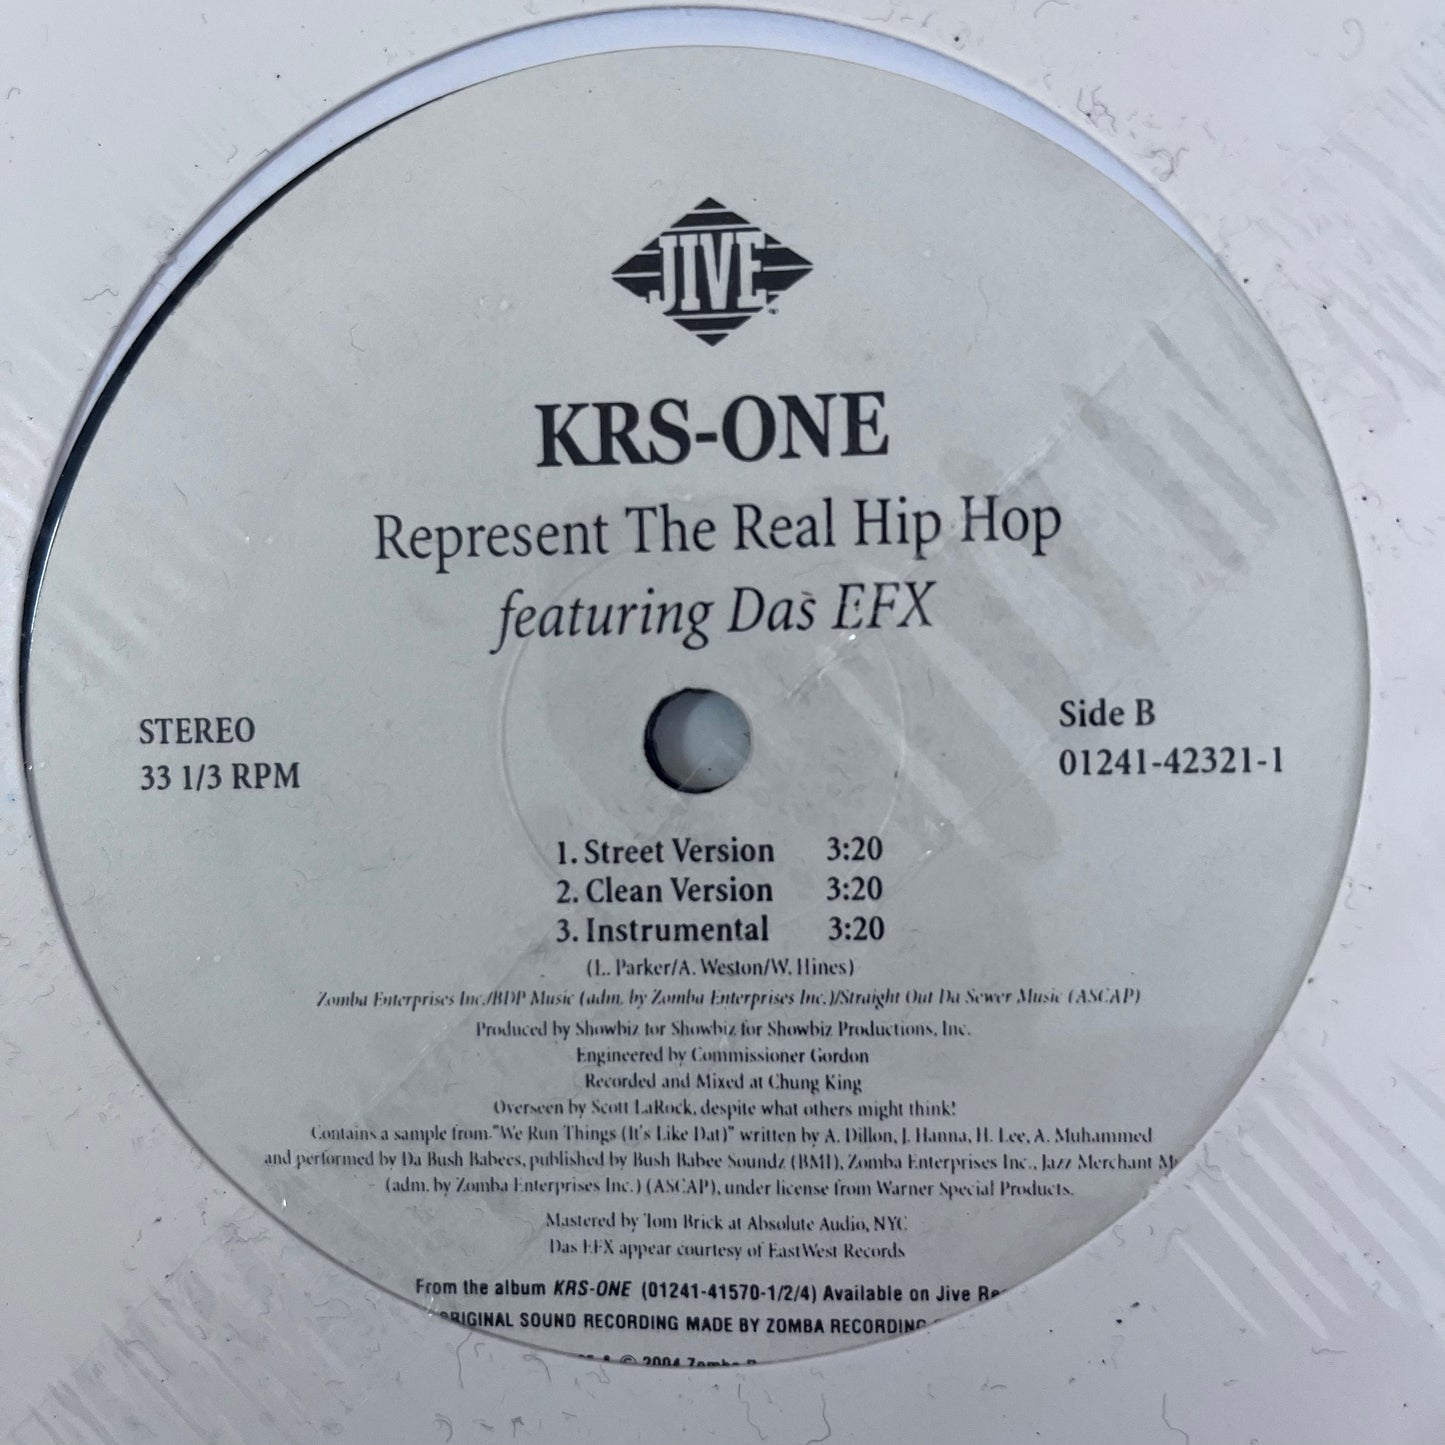 KRS-One “MCs Act Like They Don’t Know” 5 Version 12inch Vinyl Record on Jive Records